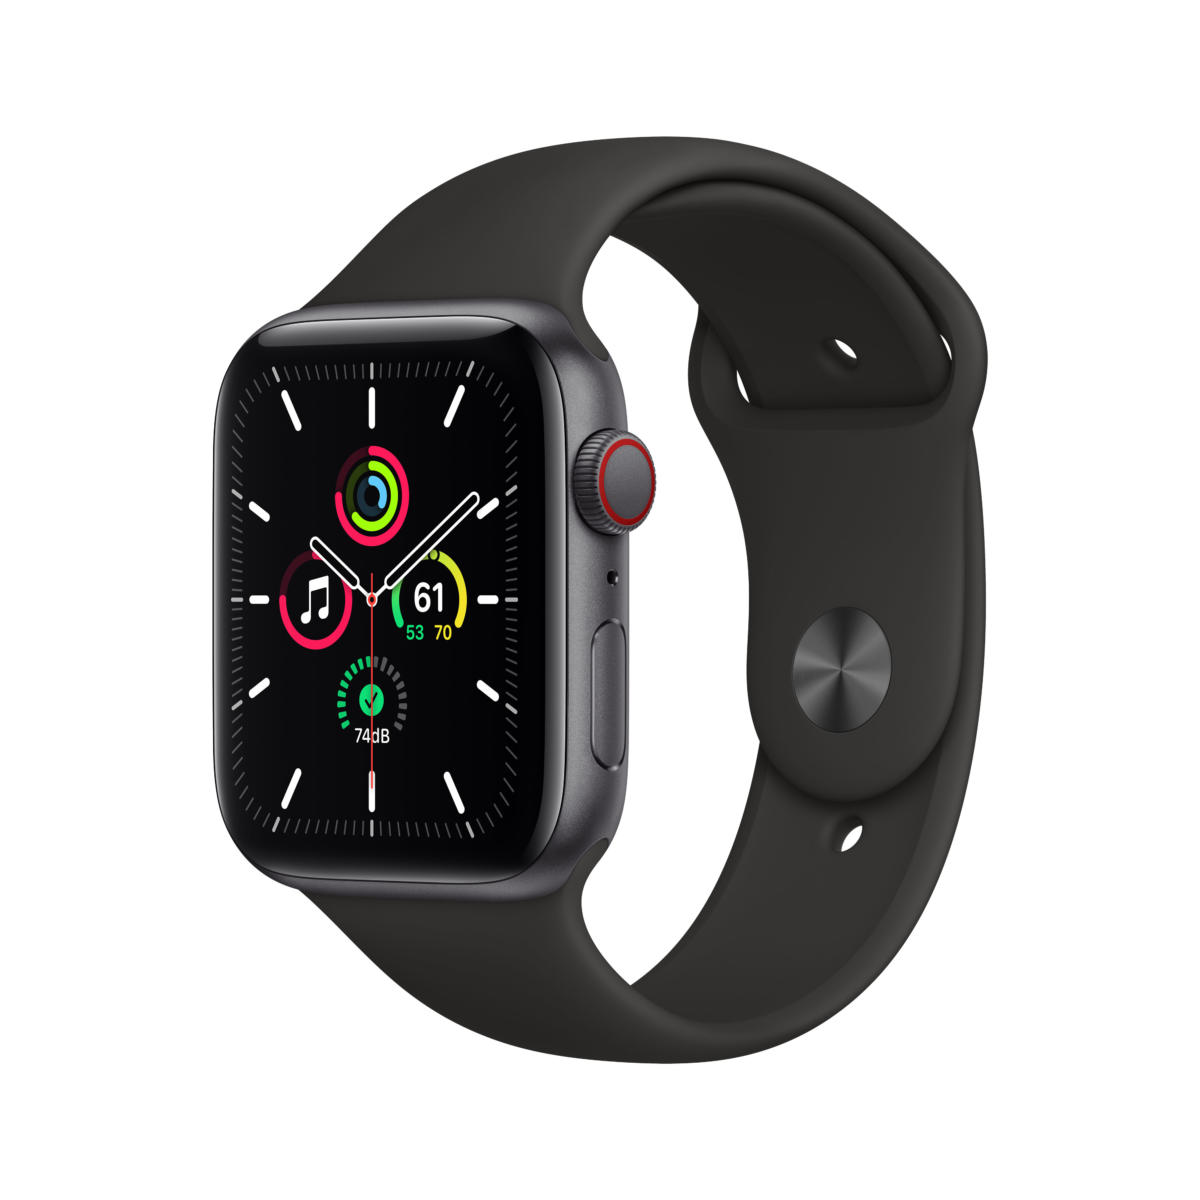 MYER2LL/A - $382 - Apple Watch SE (GPS + Cellular) 44mm Space Gray